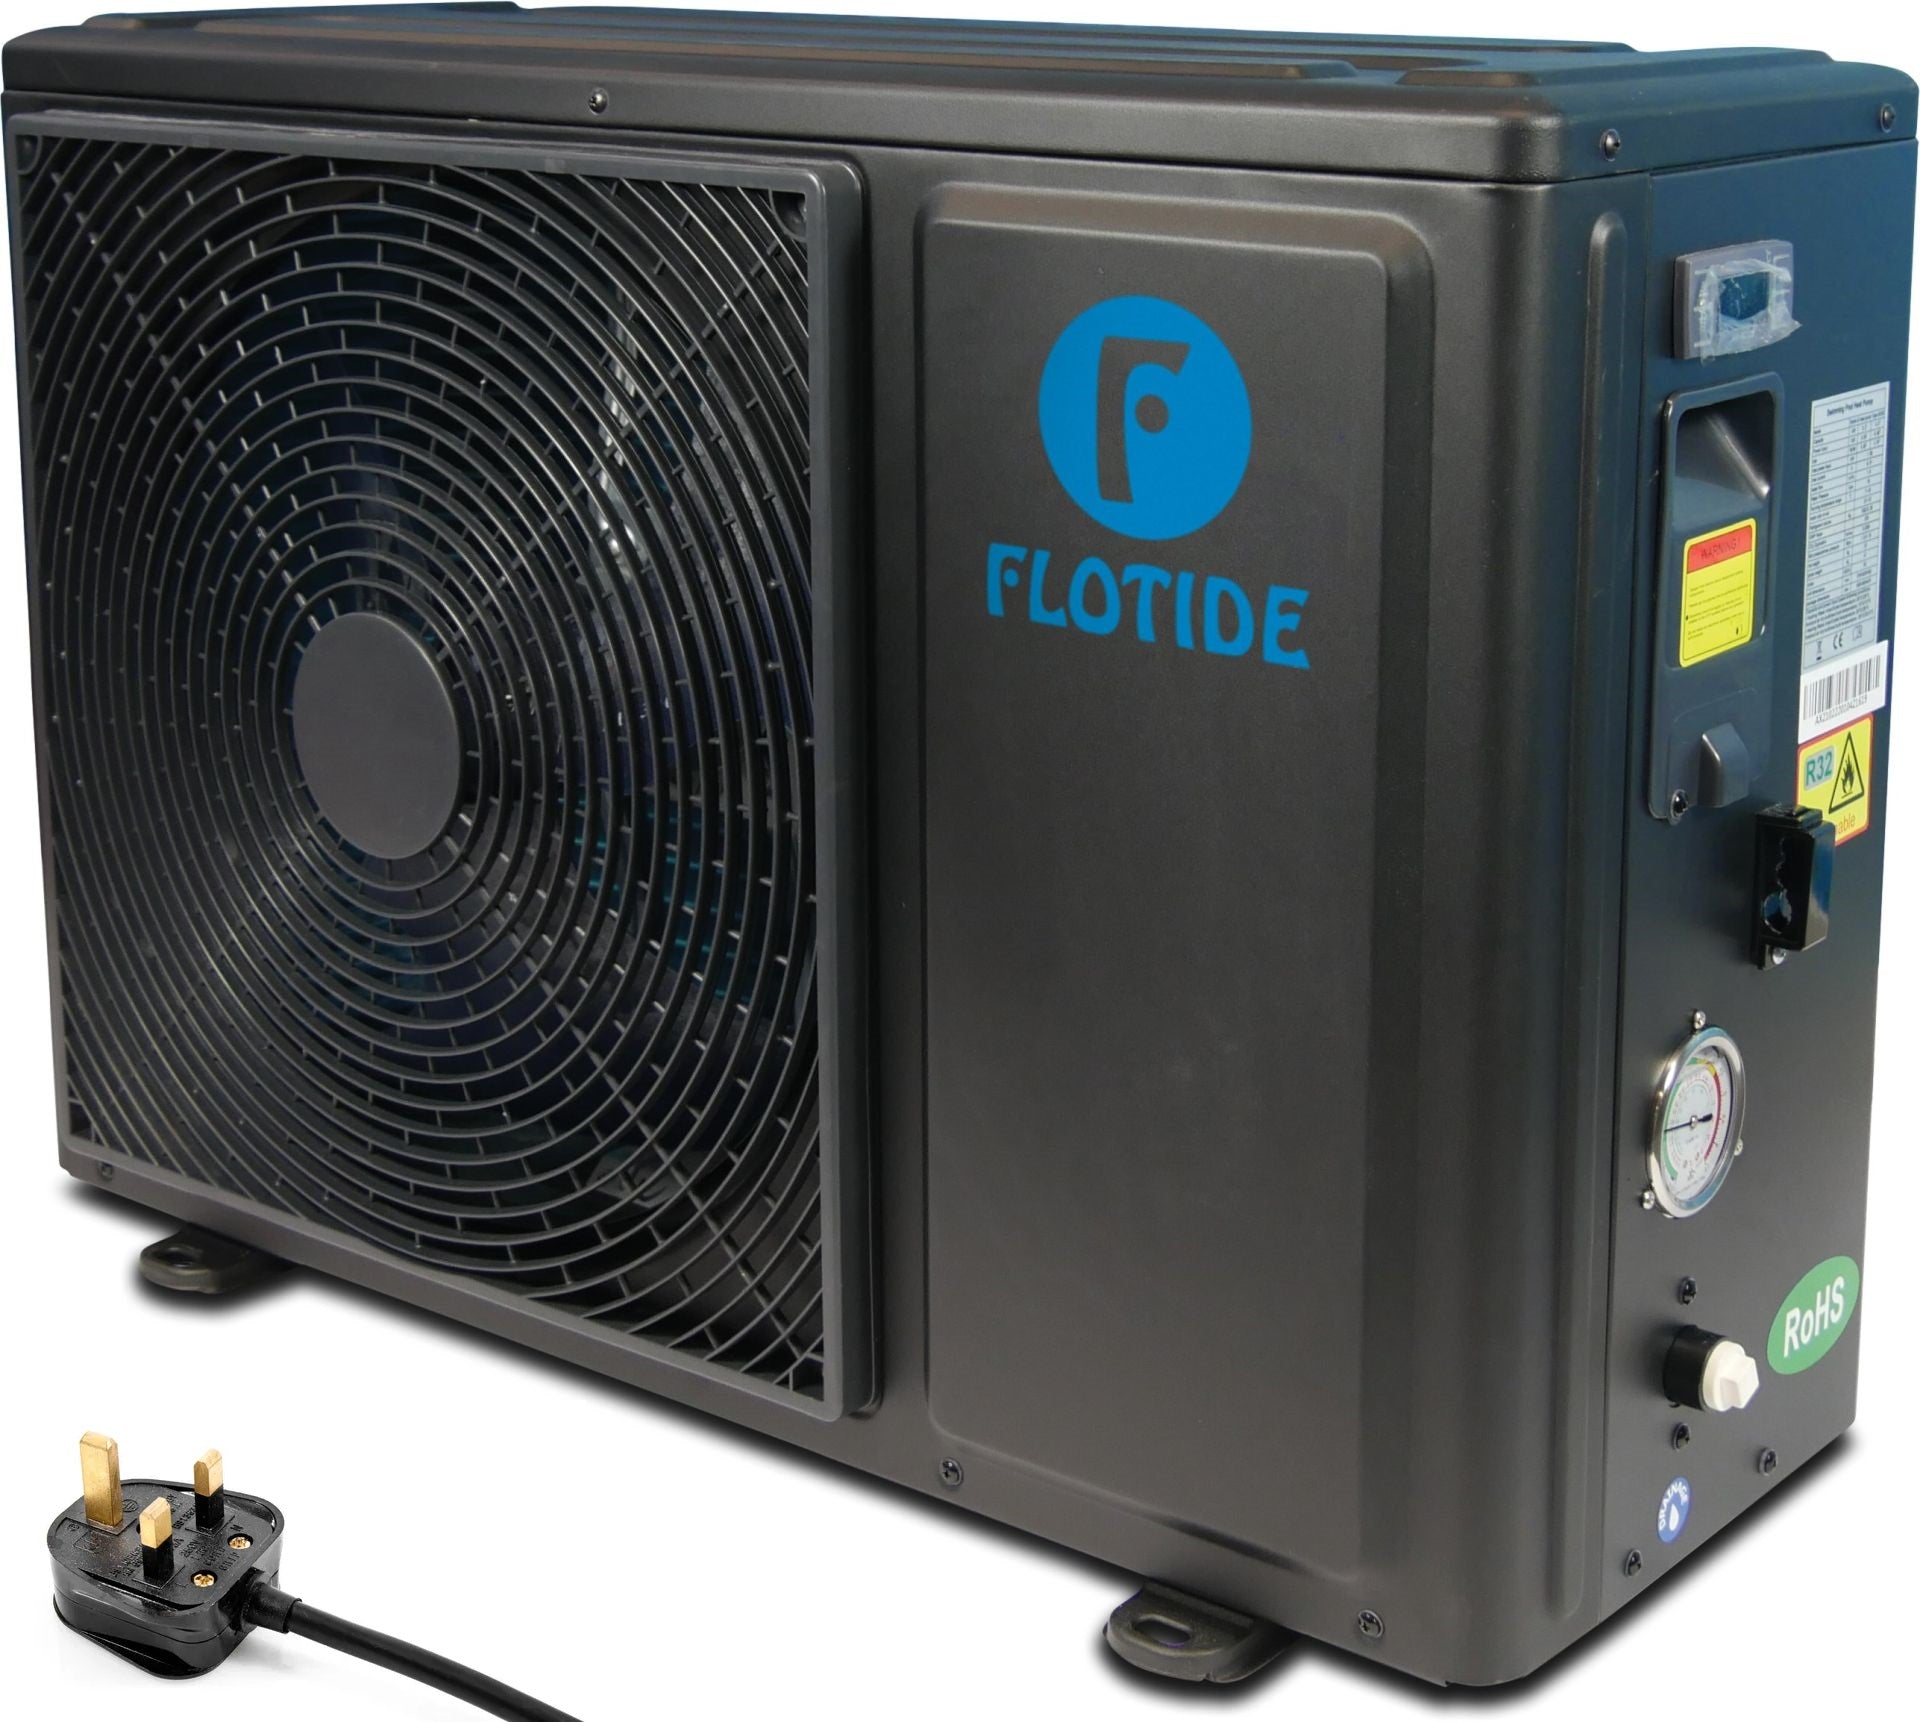 4.5KW Flotide Swimming Pool Heat Pump UK Plug and Play (A5)